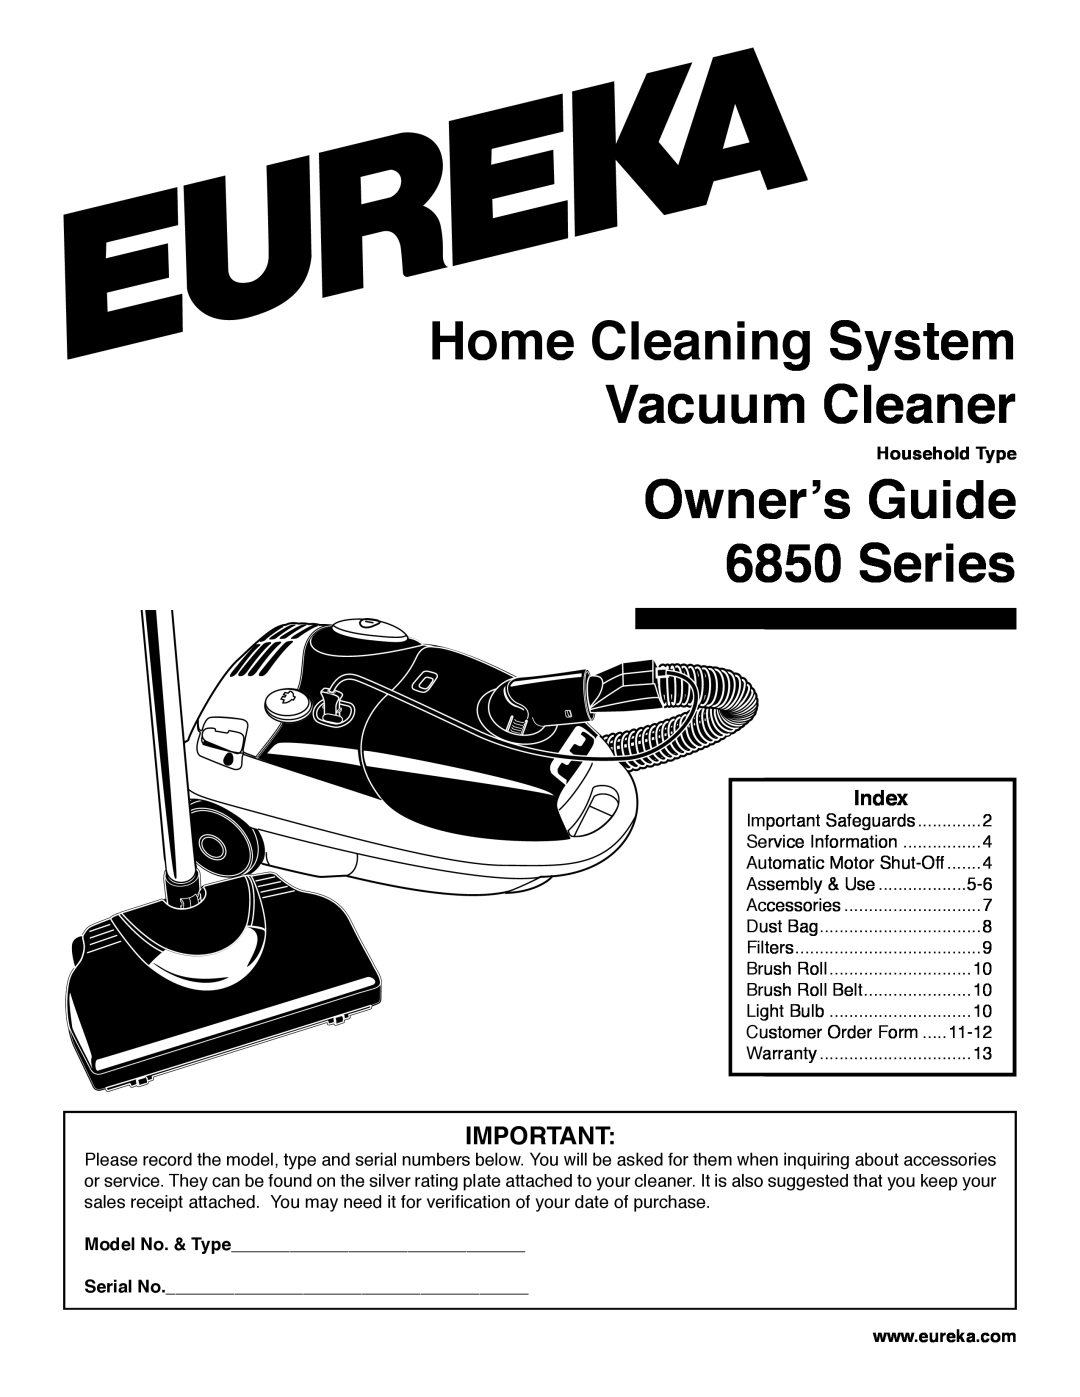 Eureka 6850 SERIES warranty Index, Home Cleaning System Vacuum Cleaner, Ownerʼs Guide 6850 Series, Household Type 